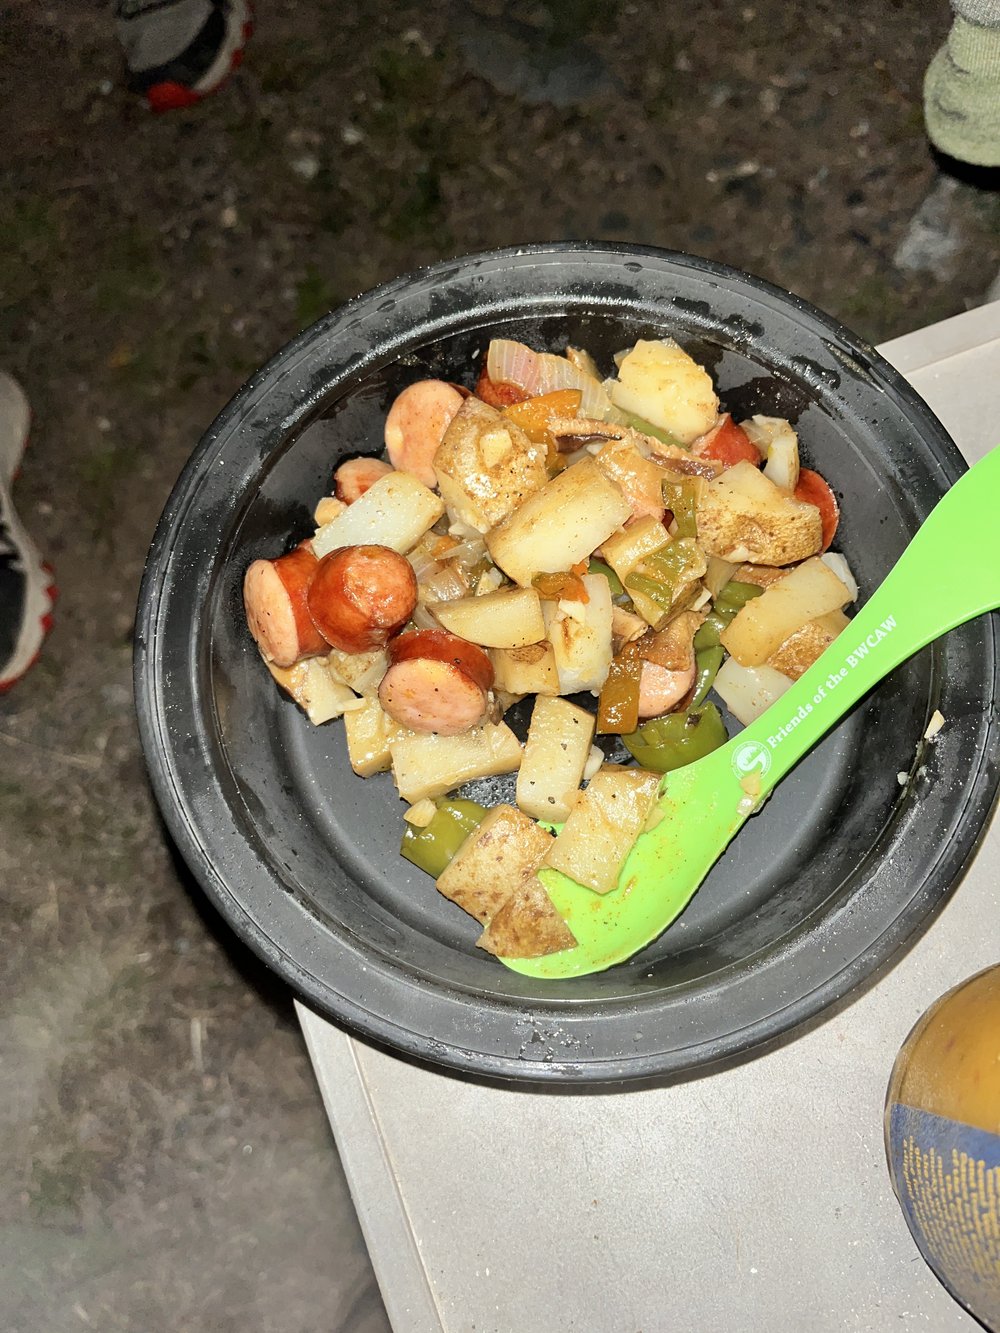 Potatoes, sausage, peppers, and chipotle seasoning fresh off the campfire